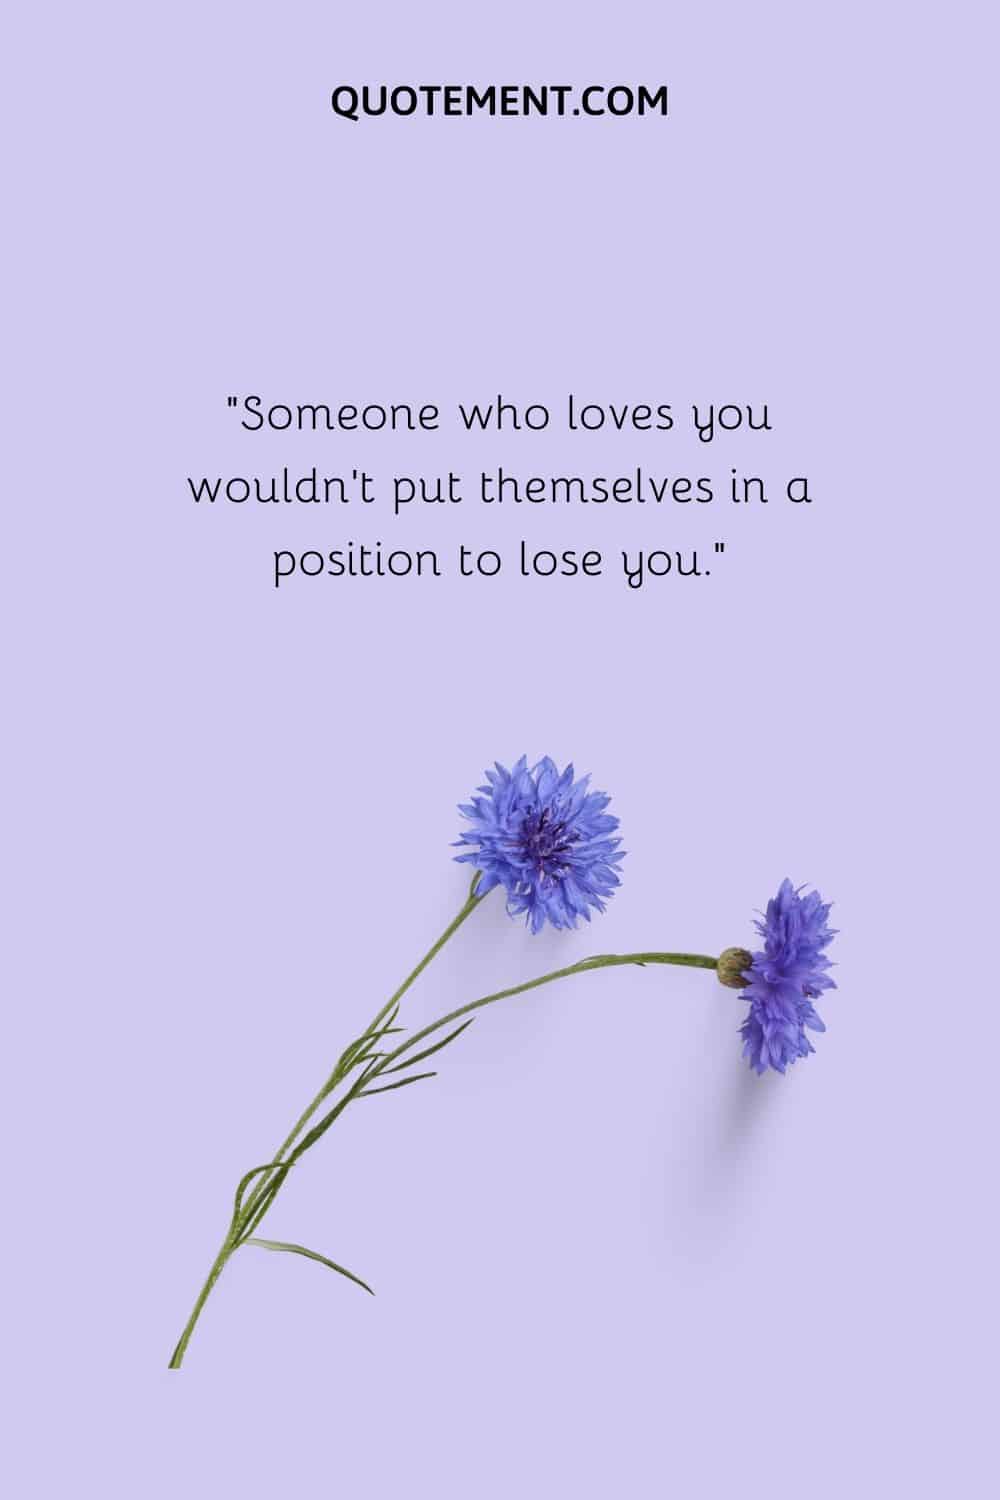 Someone who loves you wouldn’t put themselves in a position to lose you